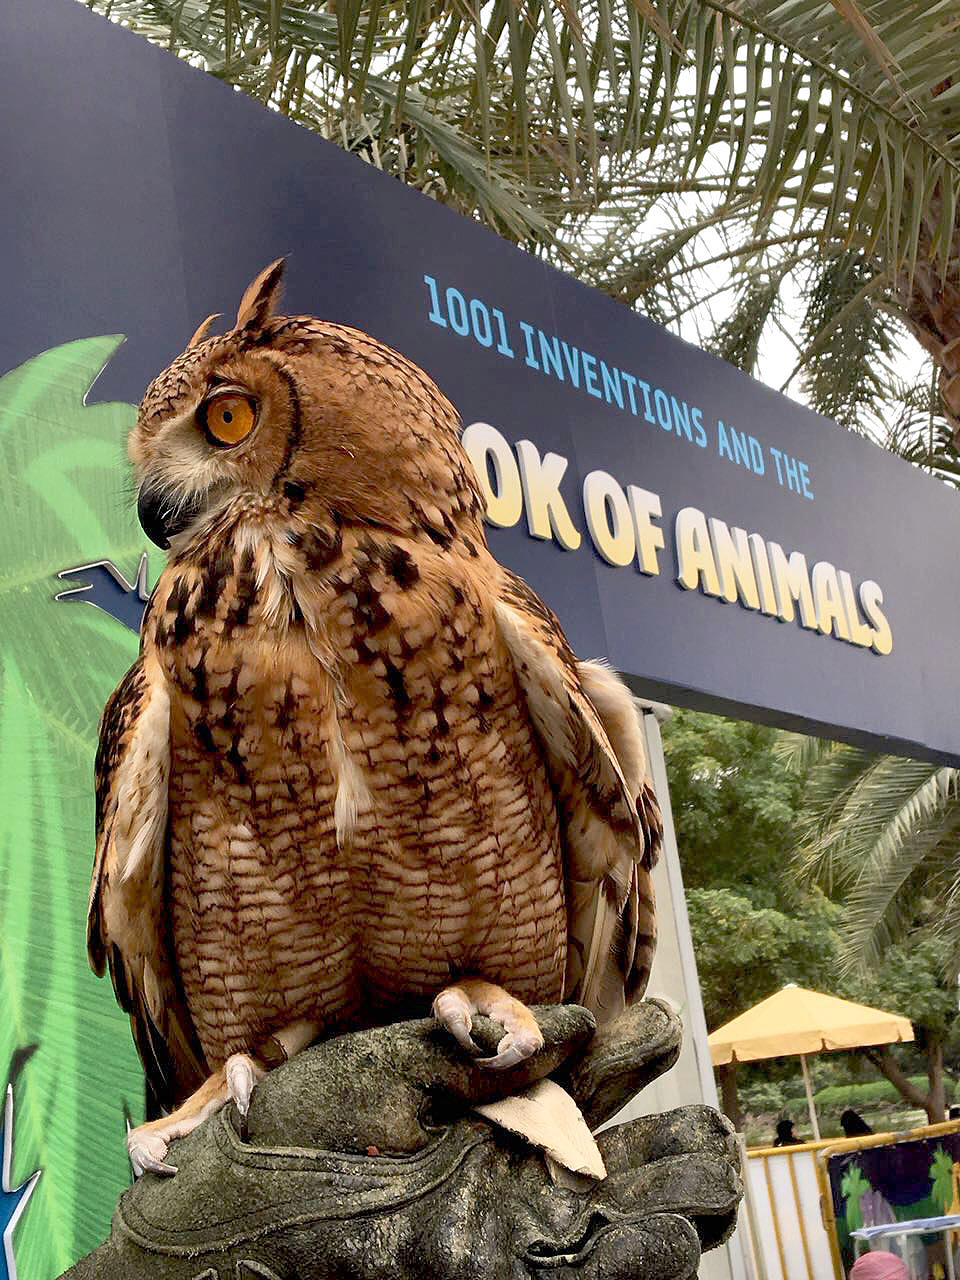 "1001 Inventions and the Book of Animals" launches at Al Ain Zoo